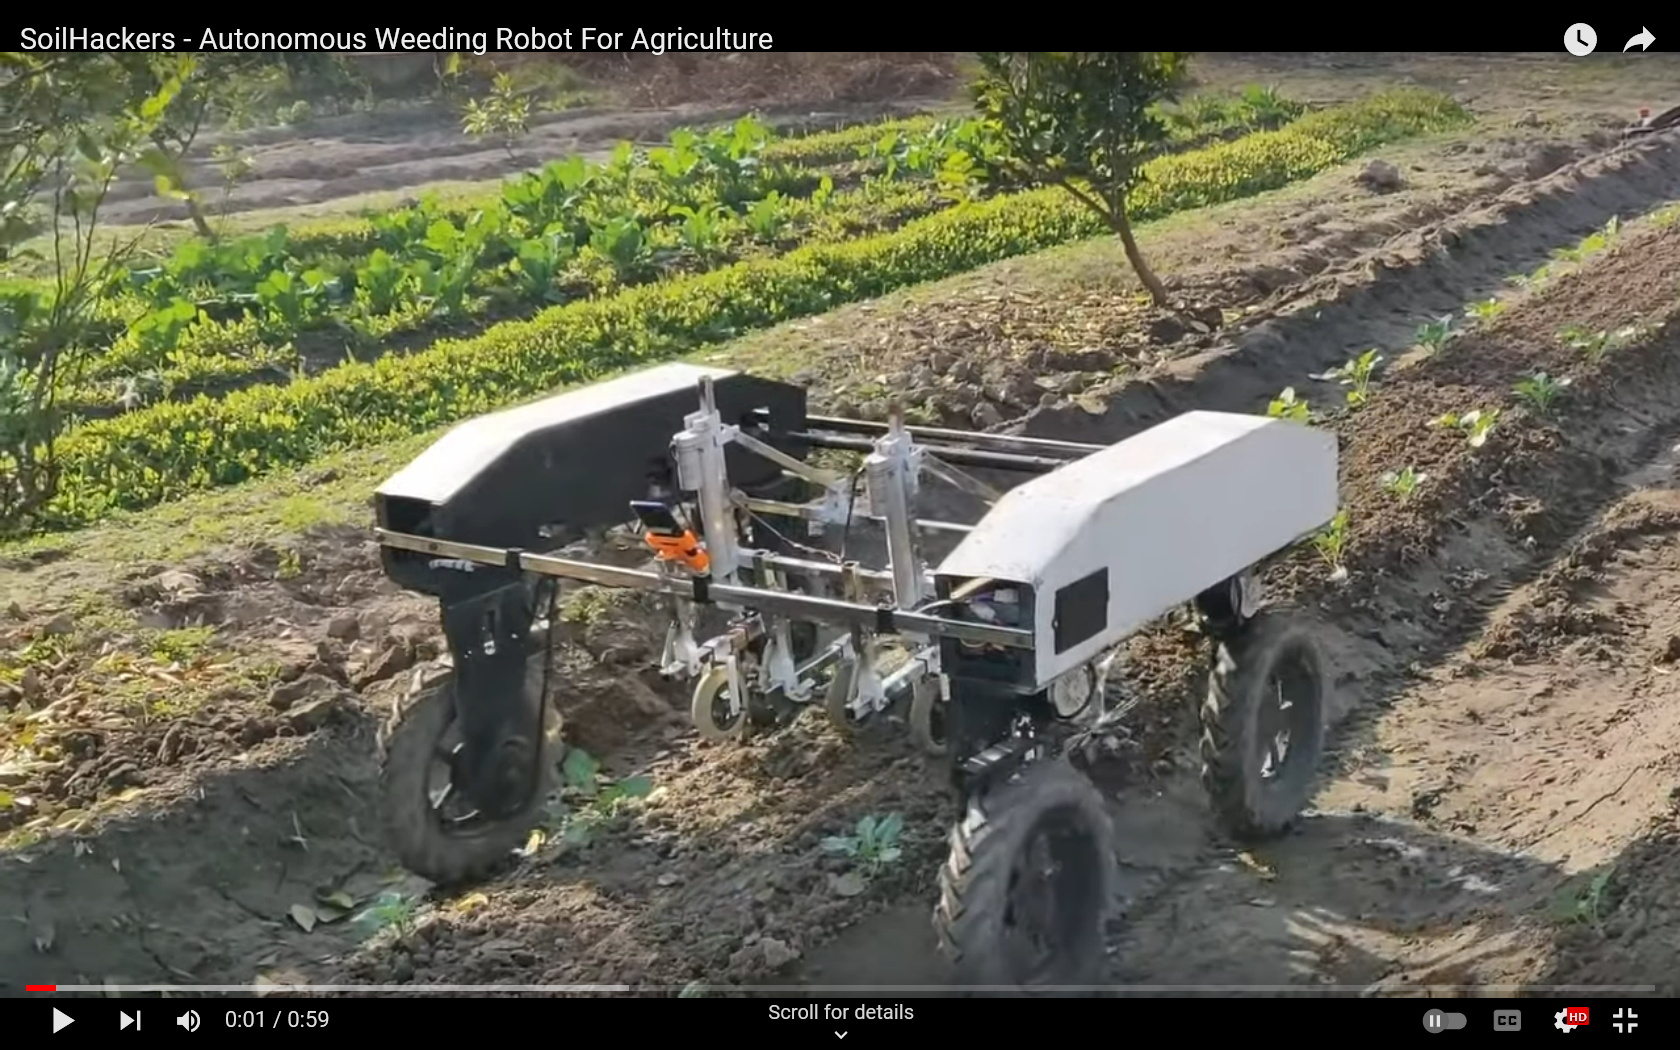 Human Hus Distraktion Low tech smart weeder - UC Weed Science - ANR Blogs